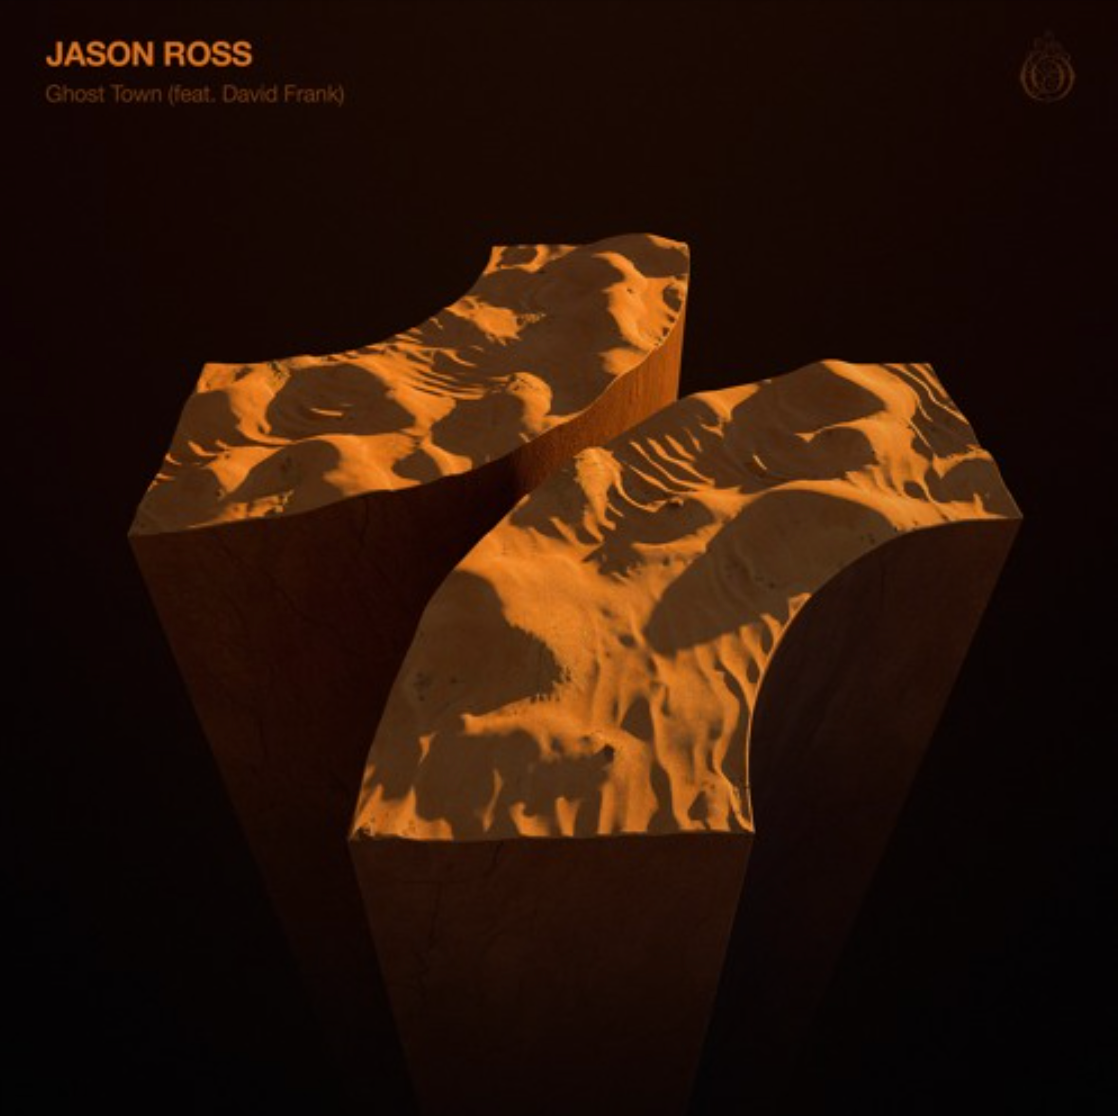 Jason Ross And David Frank Team Up Energizing House Single ‘Ghost Town’